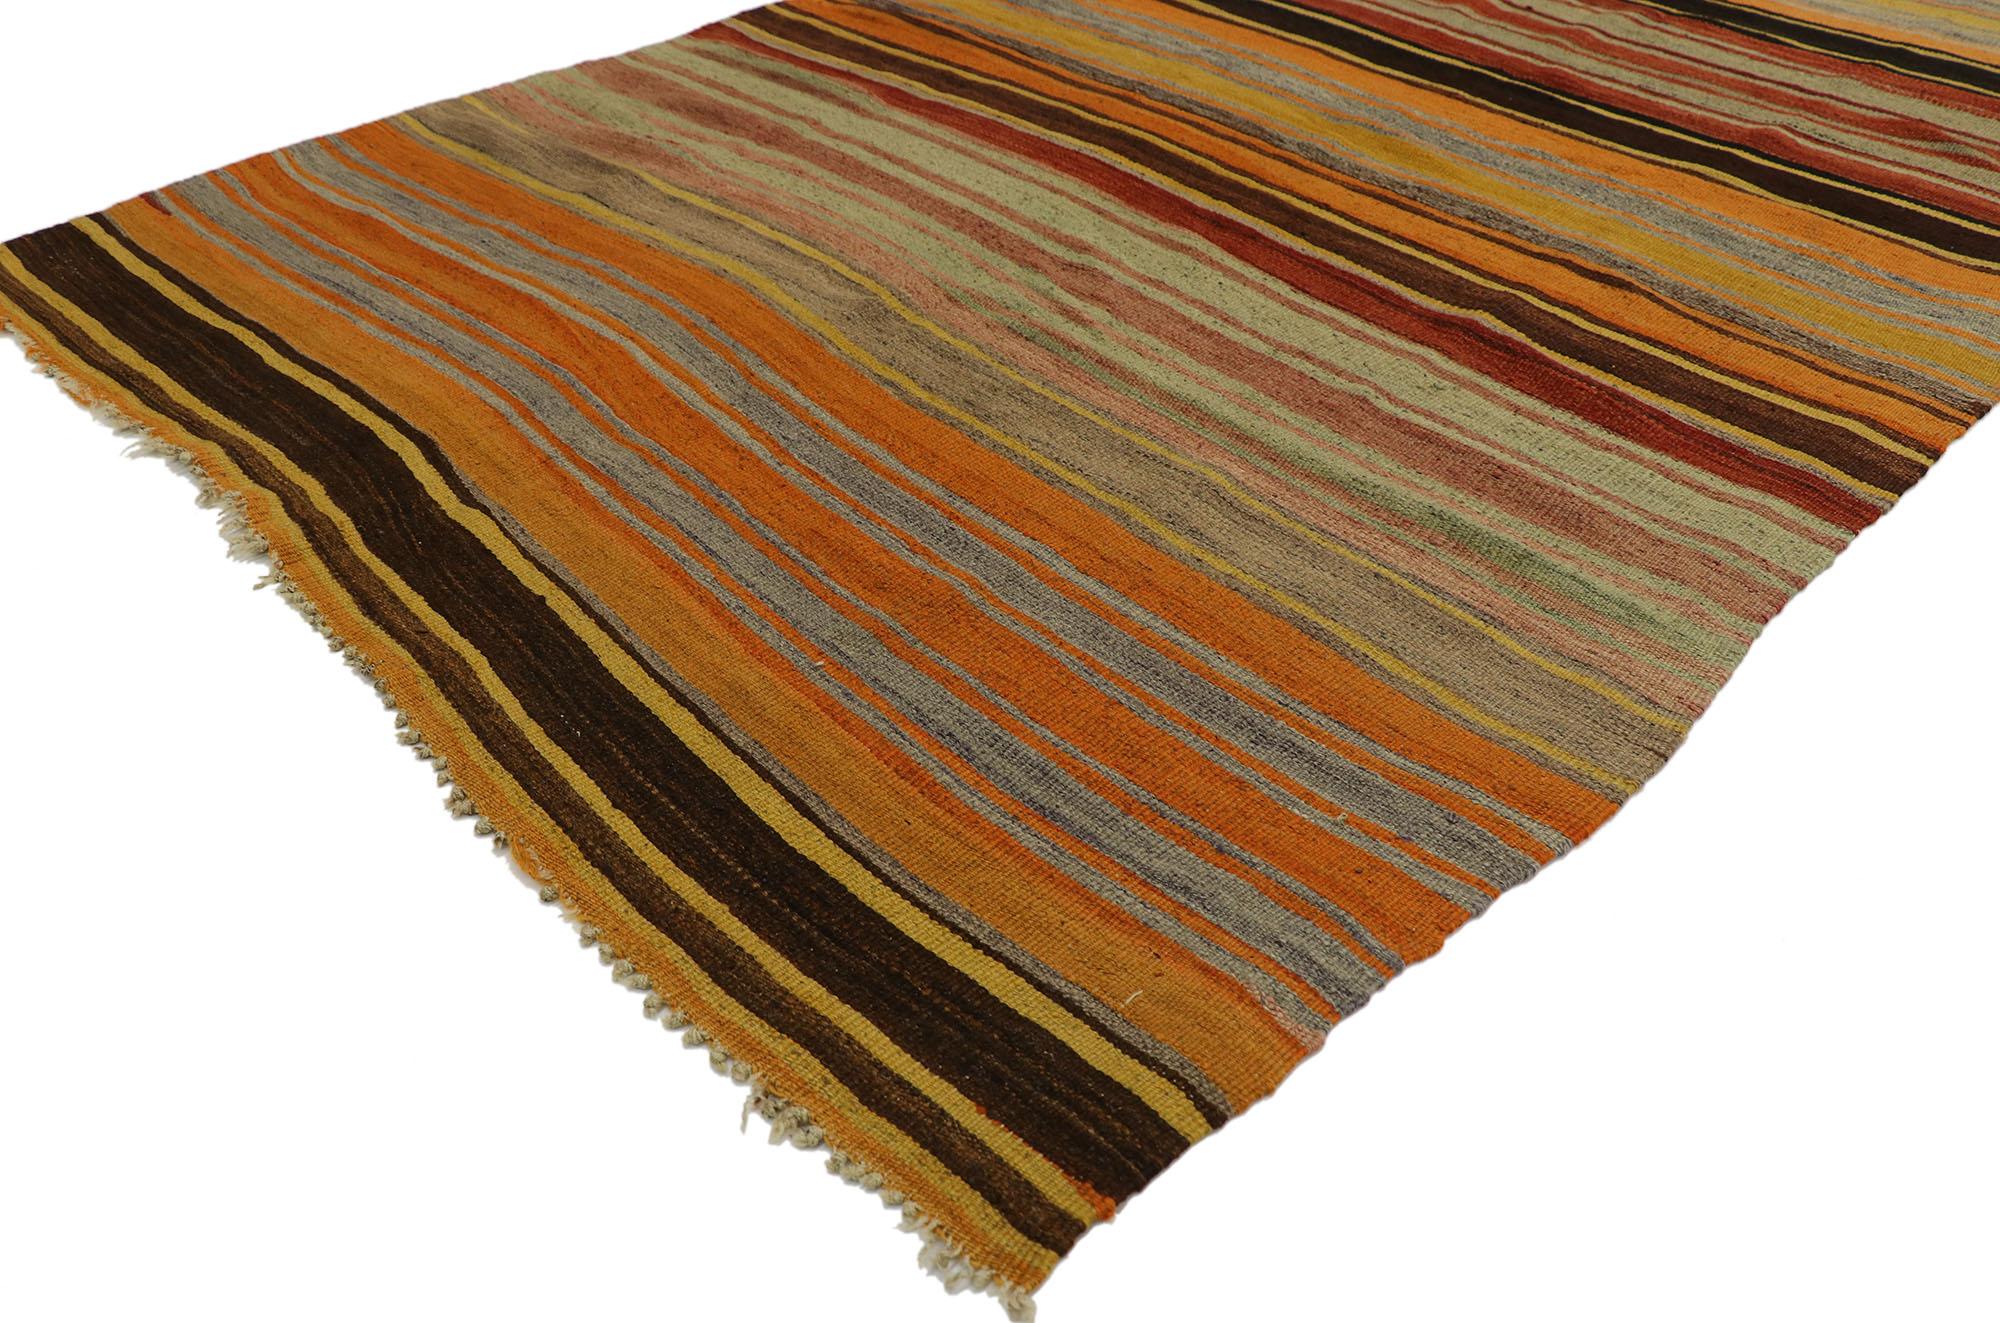 53117 vintage Turkish Striped Kilim rug. With its warm hues and rugged beauty, this handwoven wool striped kilim rug manages to meld contemporary, modern, and traditional design elements. The flat-weave kilim rug features a variety of colorful